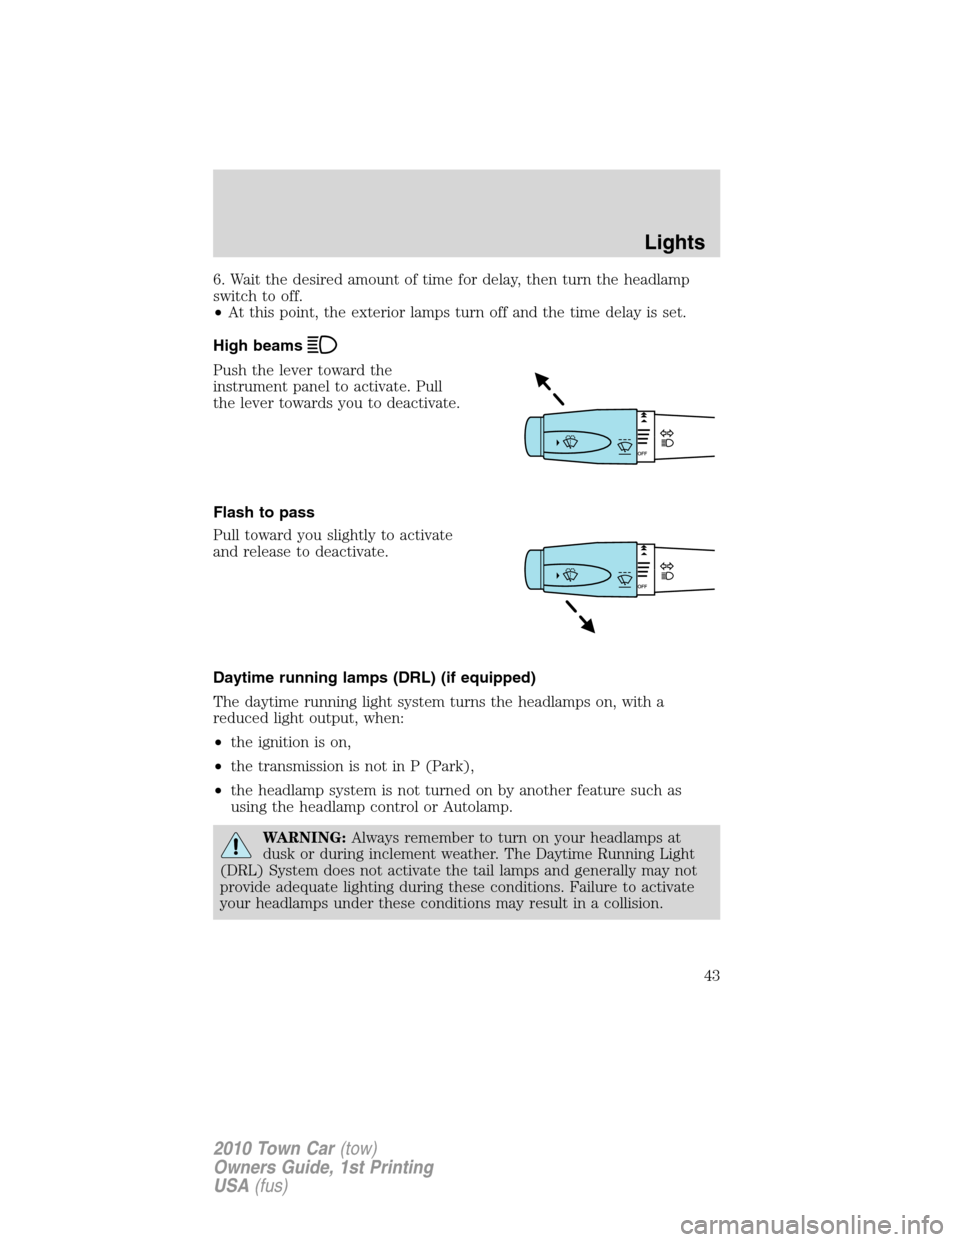 LINCOLN TOWN CAR 2010 Service Manual 6. Wait the desired amount of time for delay, then turn the headlamp
switch to off.
•At this point, the exterior lamps turn off and the time delay is set.
High beams
Push the lever toward the
instru